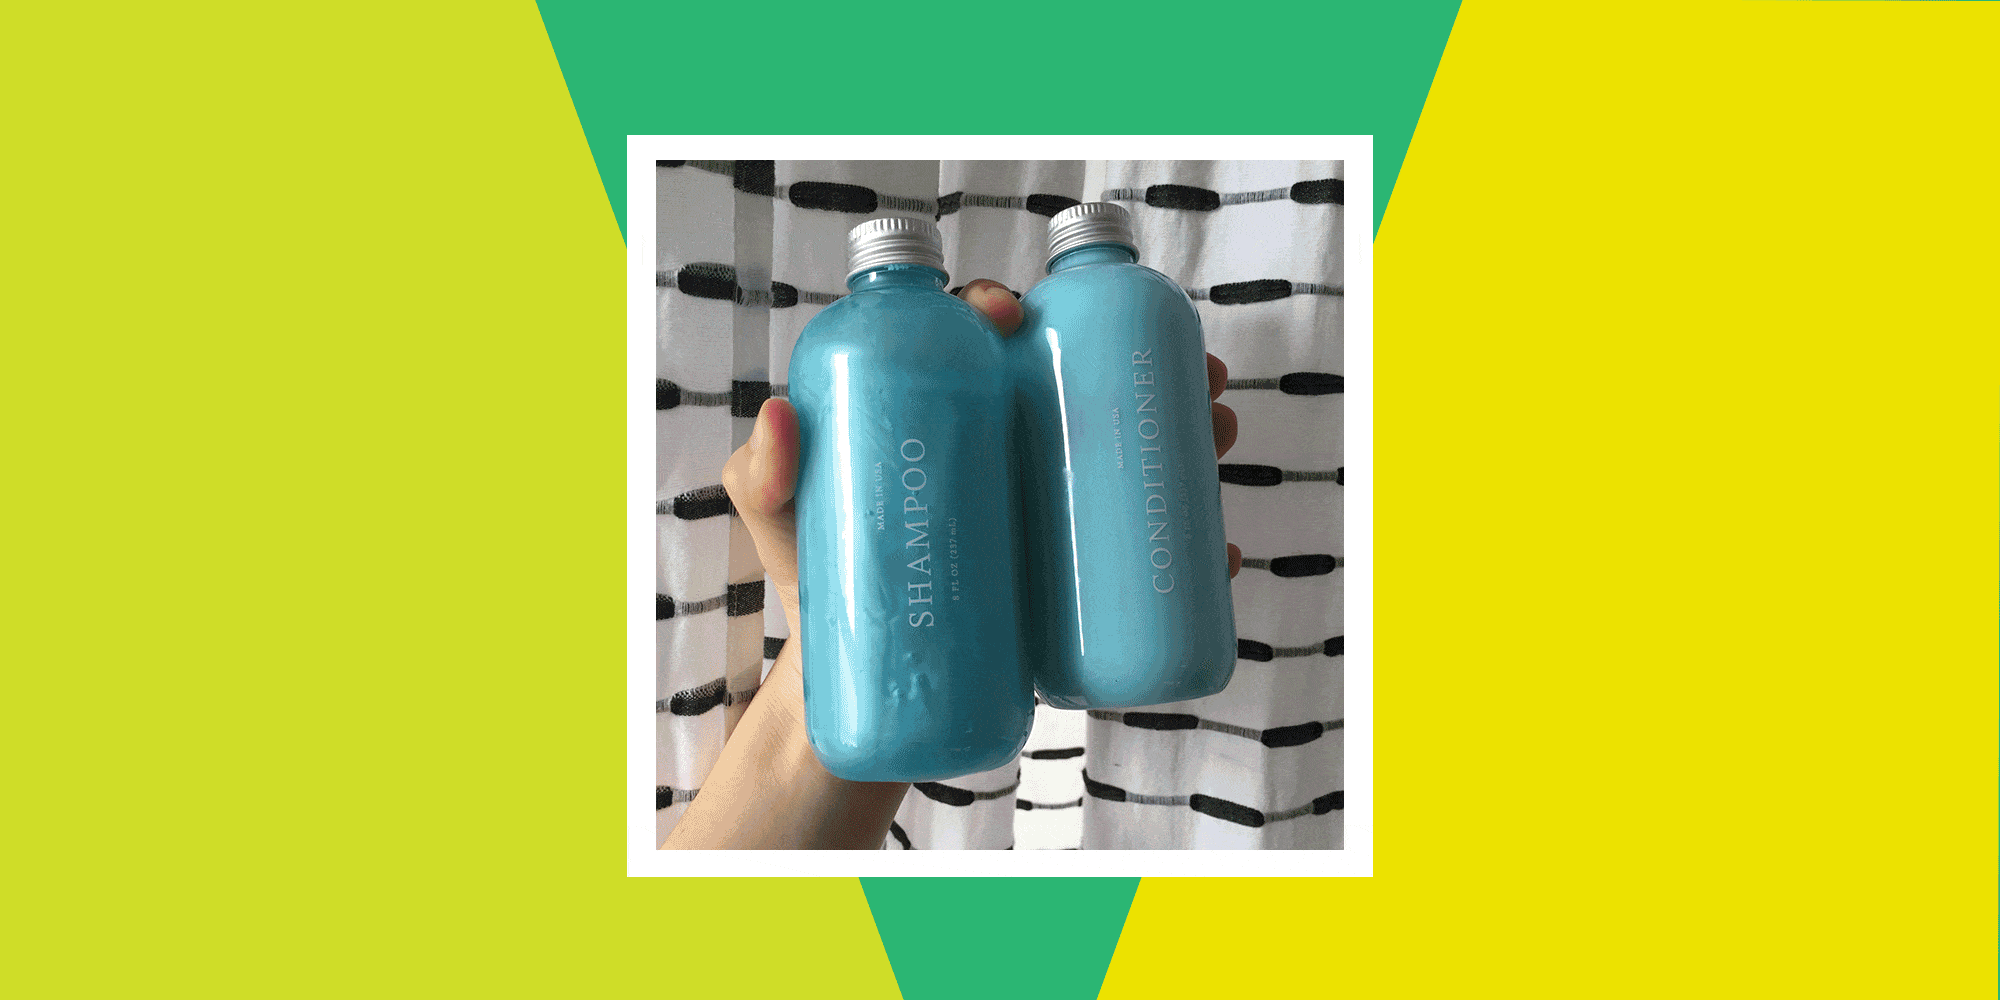 I Tried the Viral Air Up Water Bottle To See if It Deserves the Hype